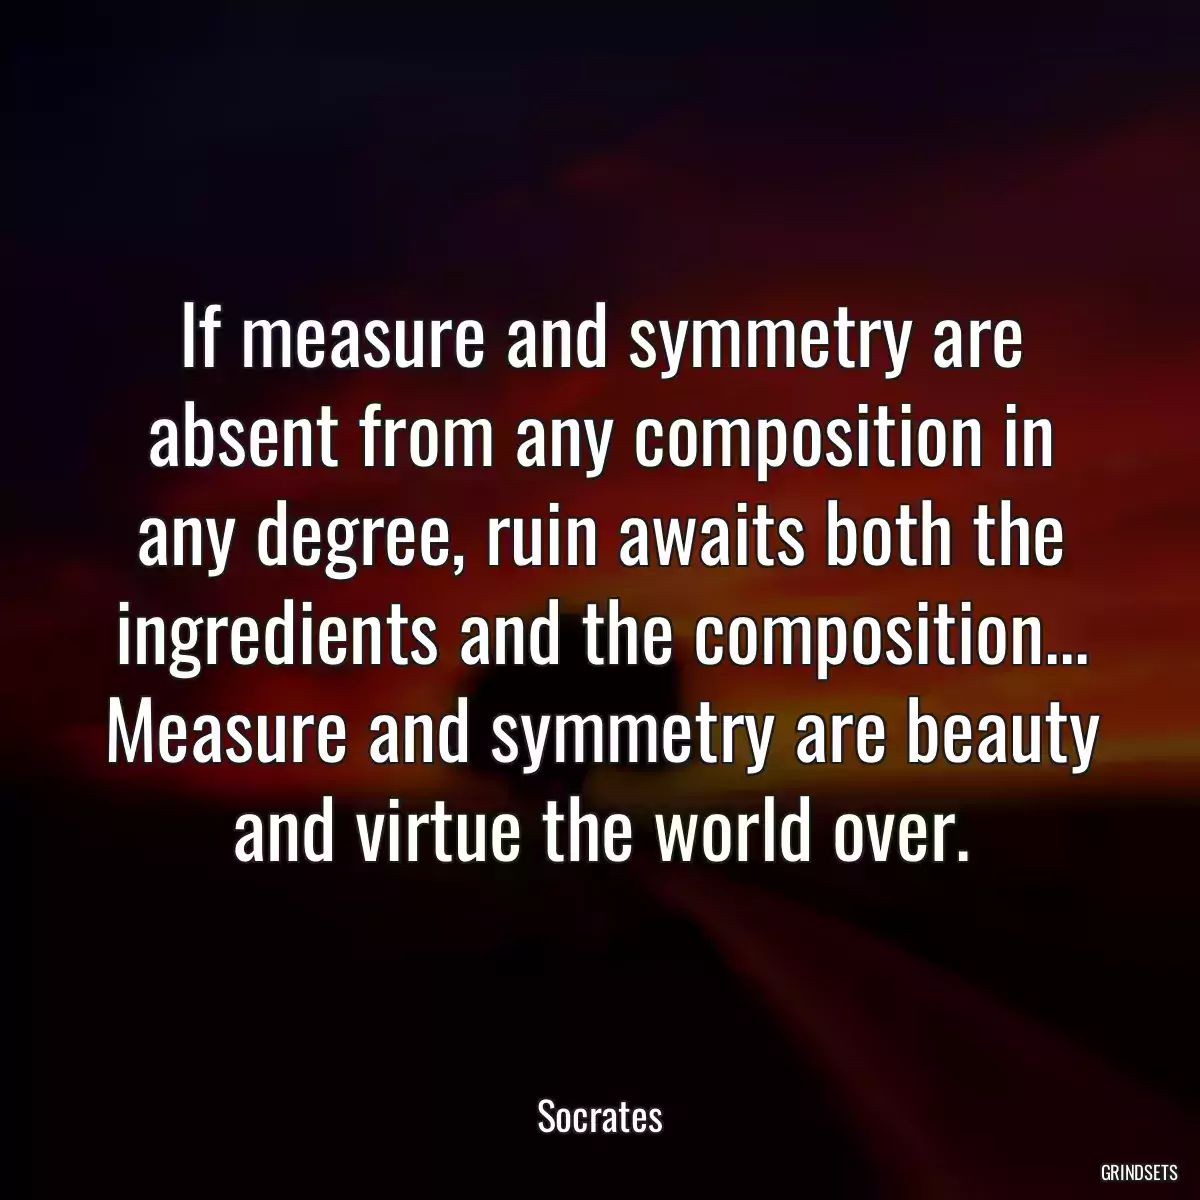 If measure and symmetry are absent from any composition in any degree, ruin awaits both the ingredients and the composition... Measure and symmetry are beauty and virtue the world over.